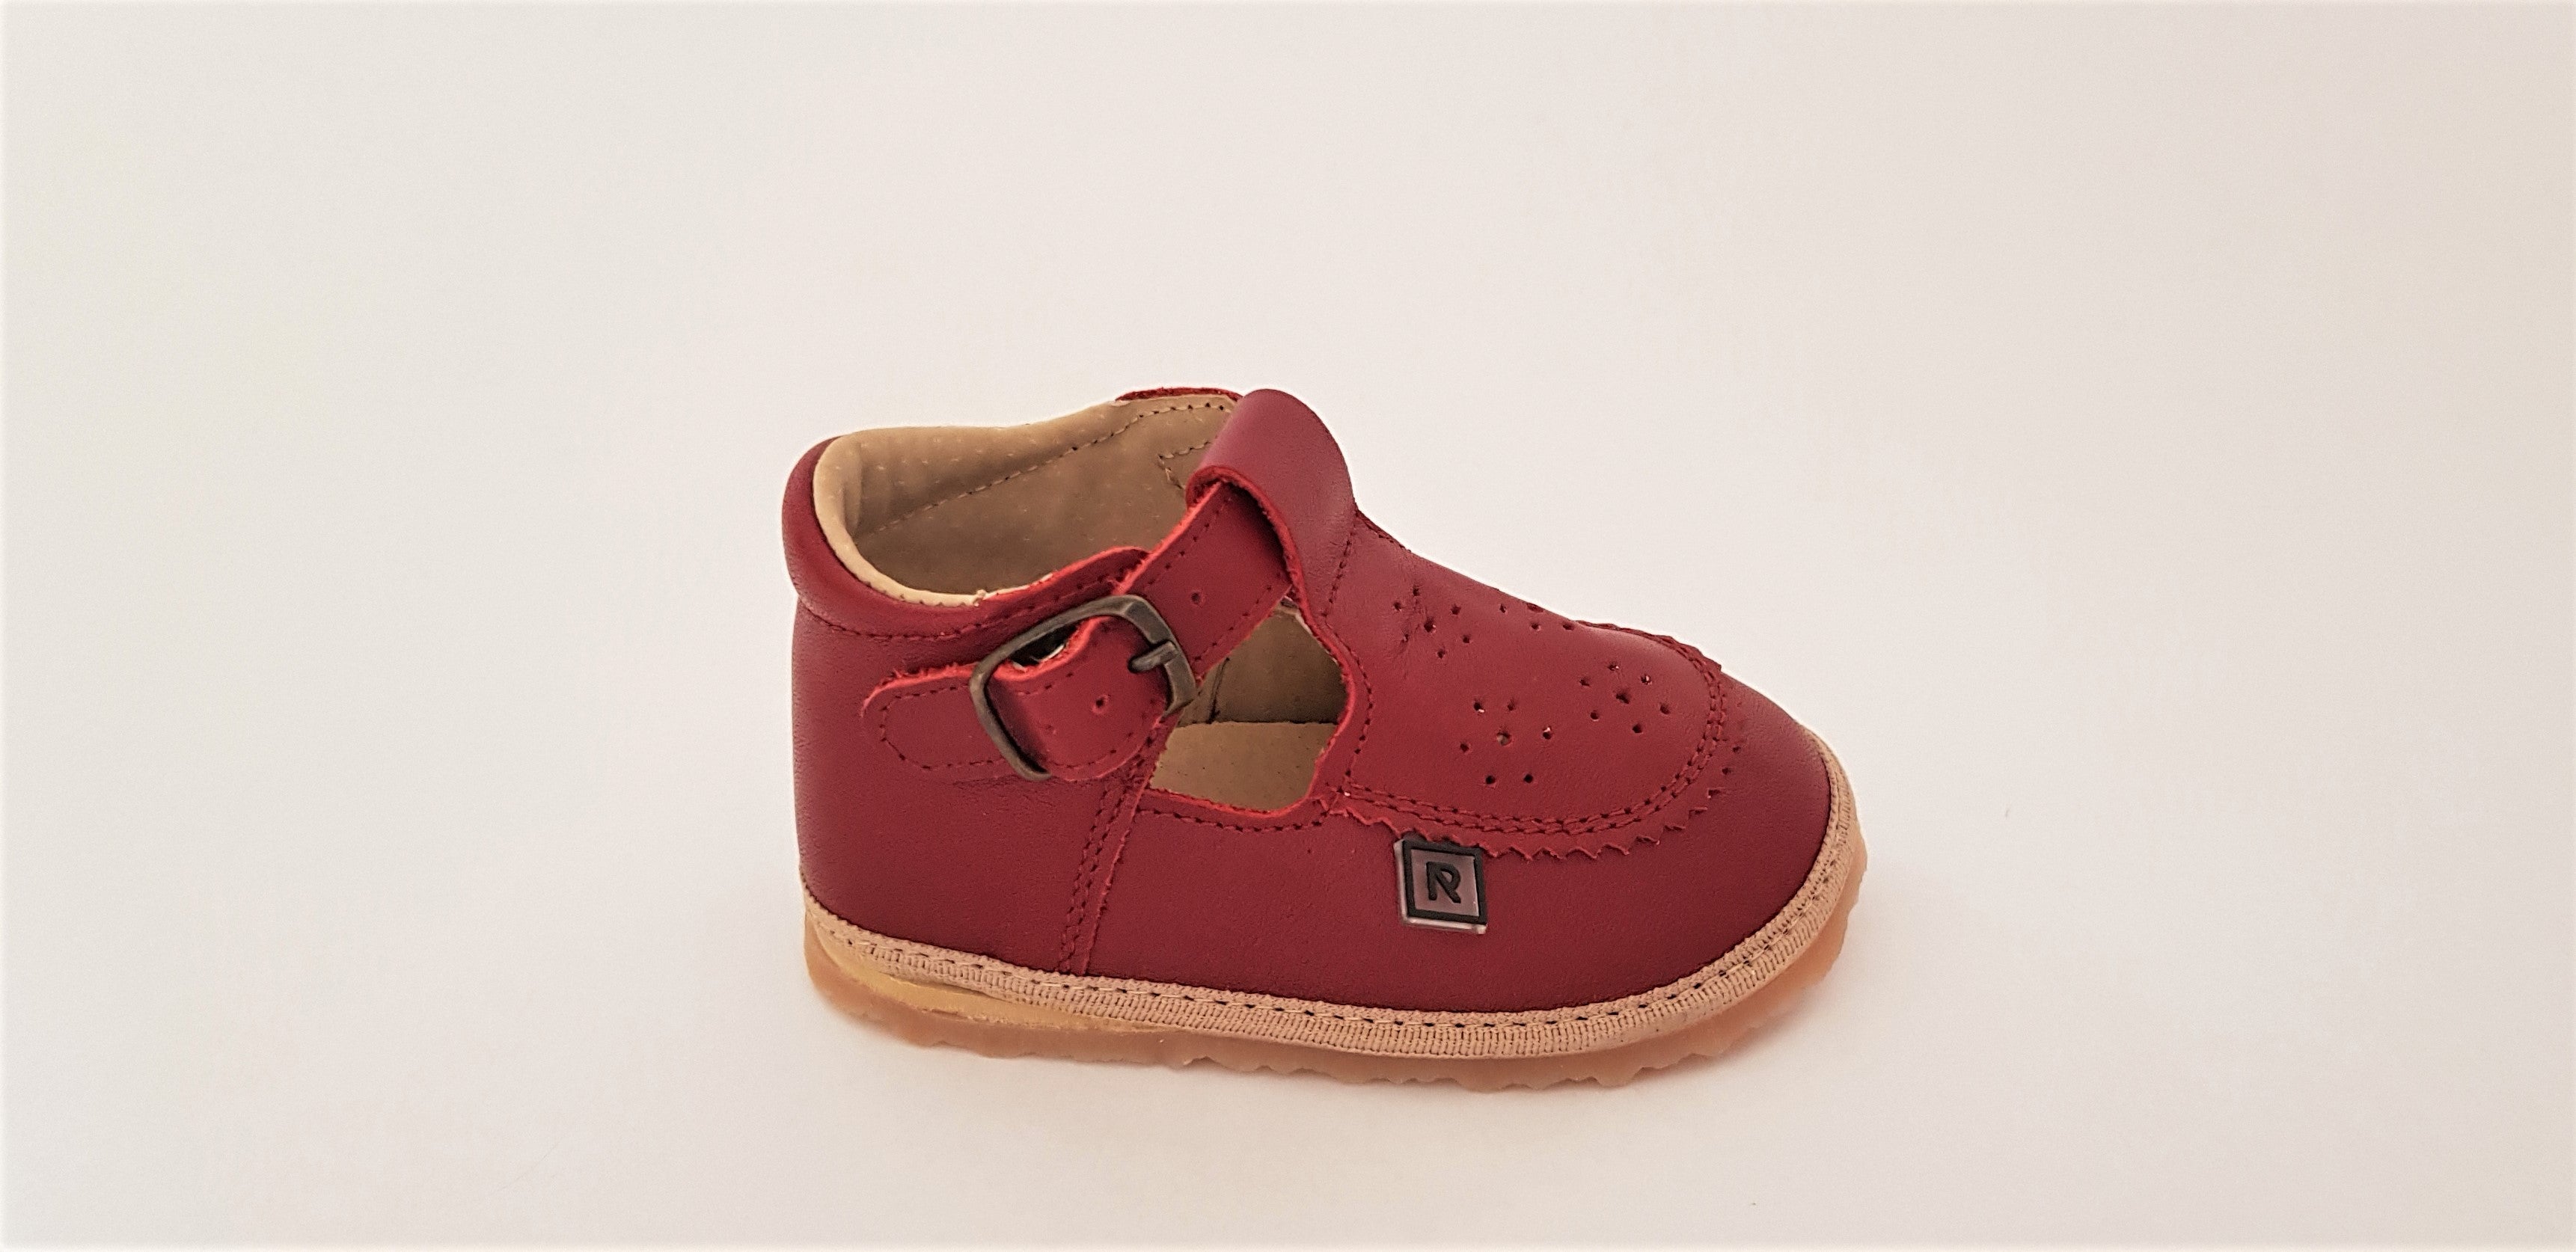 Vintage-style T-bar Dark Red Toddler First Walking Shoes with side Buckle fastening and anatomically shaped toe box